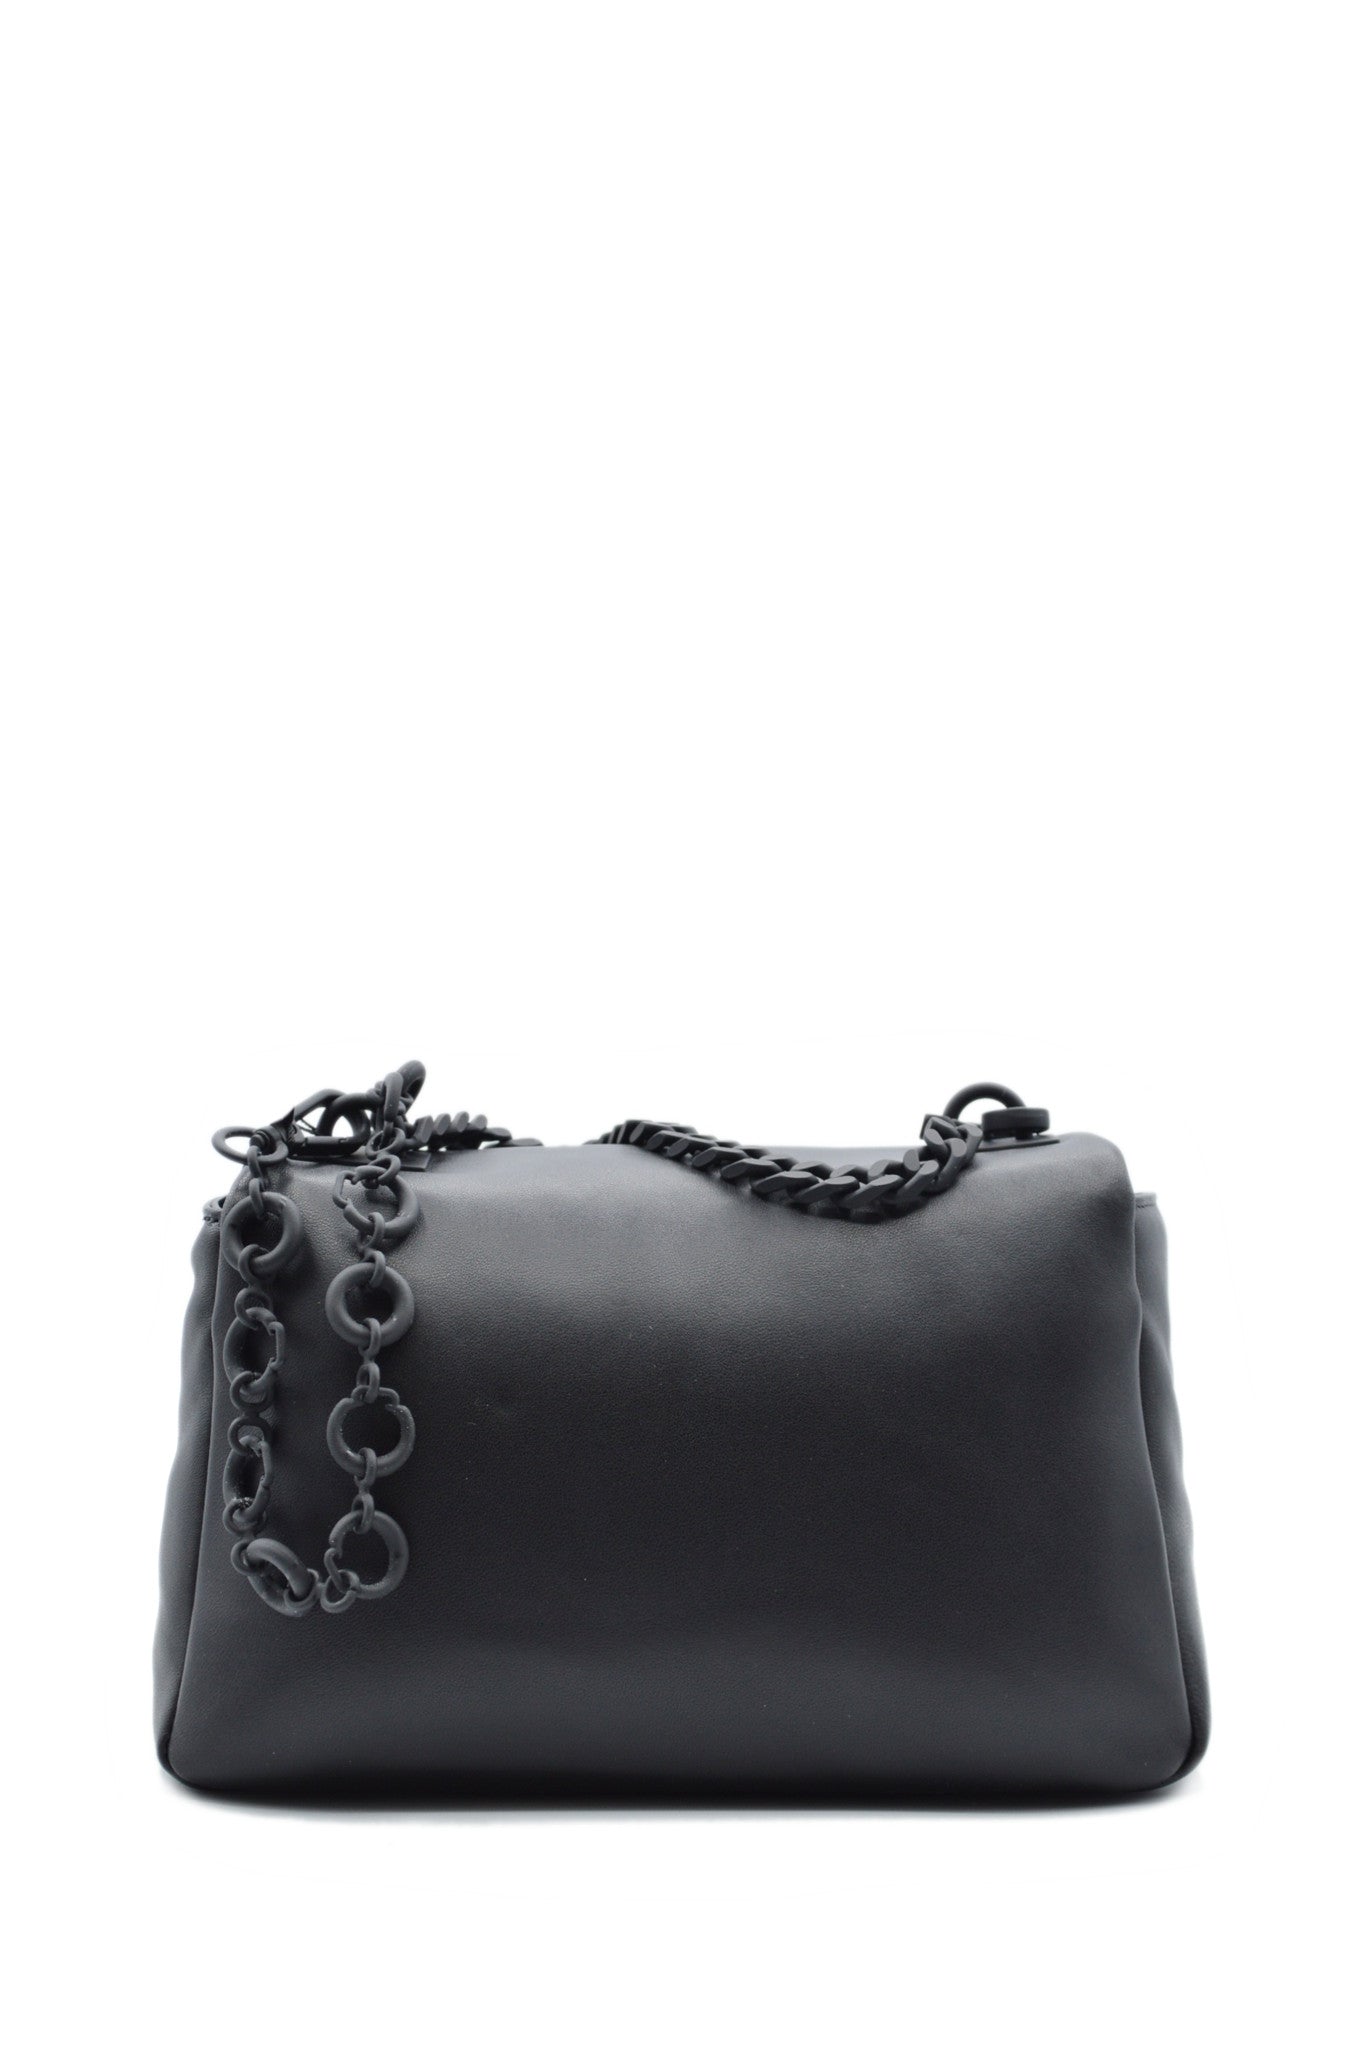 DECCAN STEPHY MED. HAND BAG LEATHER